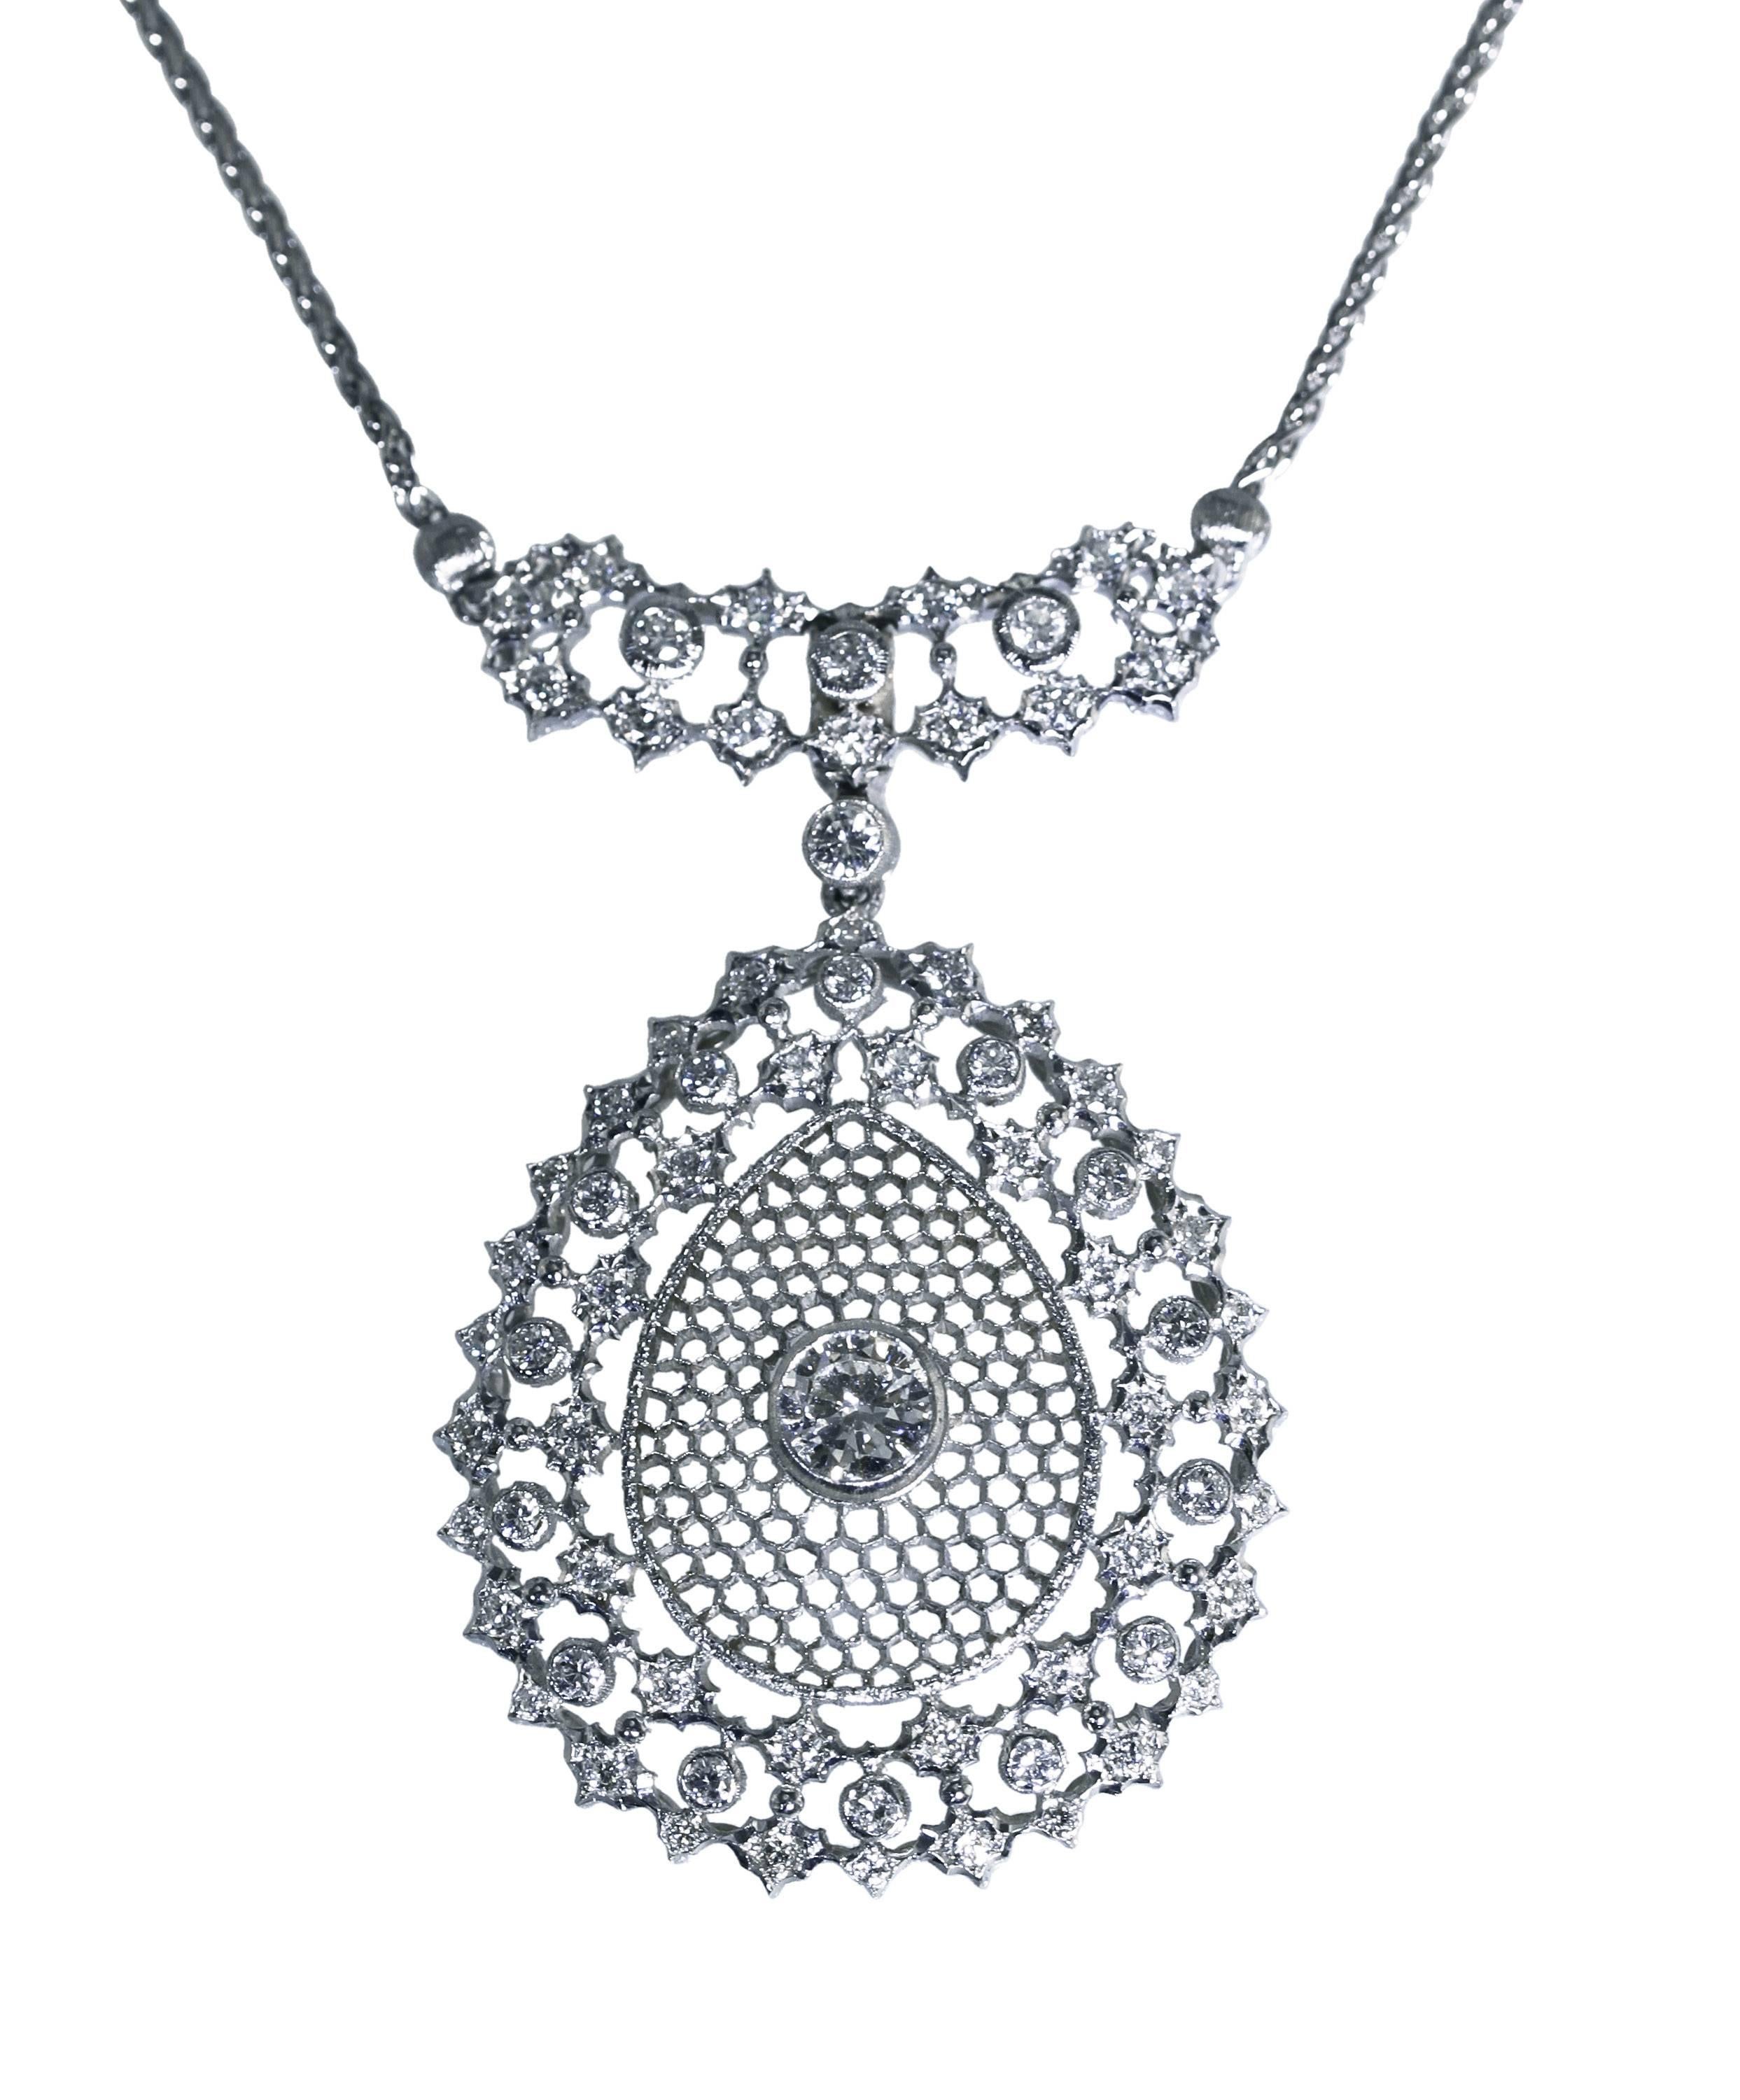 18 Karat White Gold and Diamond Pendant Necklace by Buccellati, Italy
• Signed M. Buccellati Italy
• Buccellati appraisal for $55,000 dated 10/09/2017
• 74 round diamonds weighing approximately 1.90 carats
• Length 16 1/2 inches, pendant measuring 1